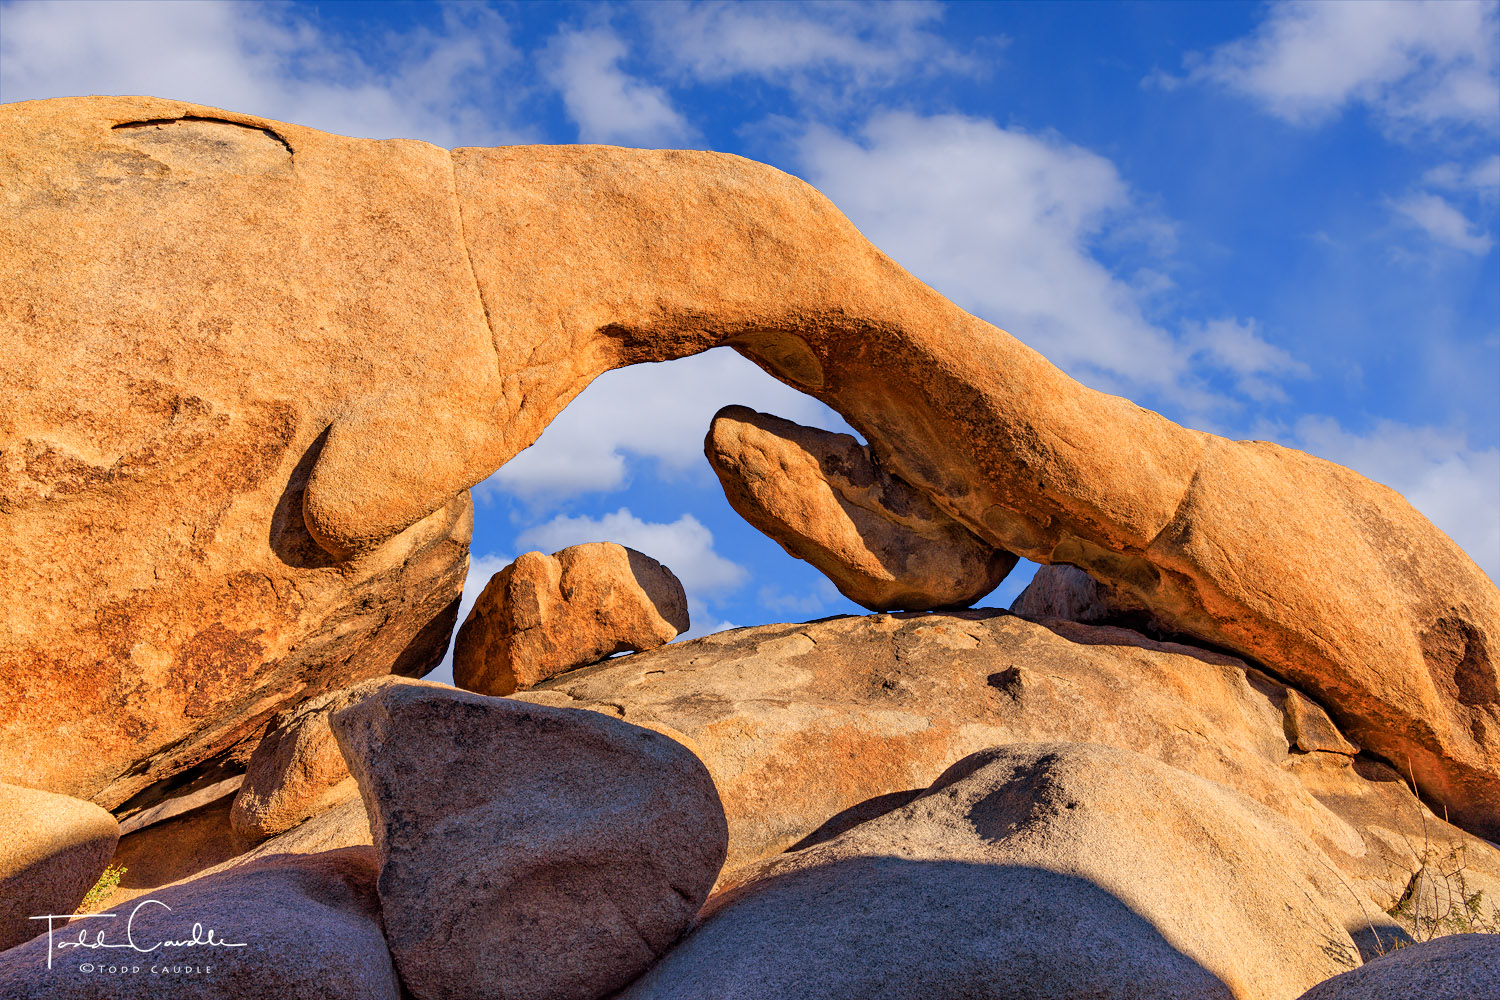 Among the jumble of rocks that Joshua Tree National Park is famous for, Arch Rock provides a window to the sky.